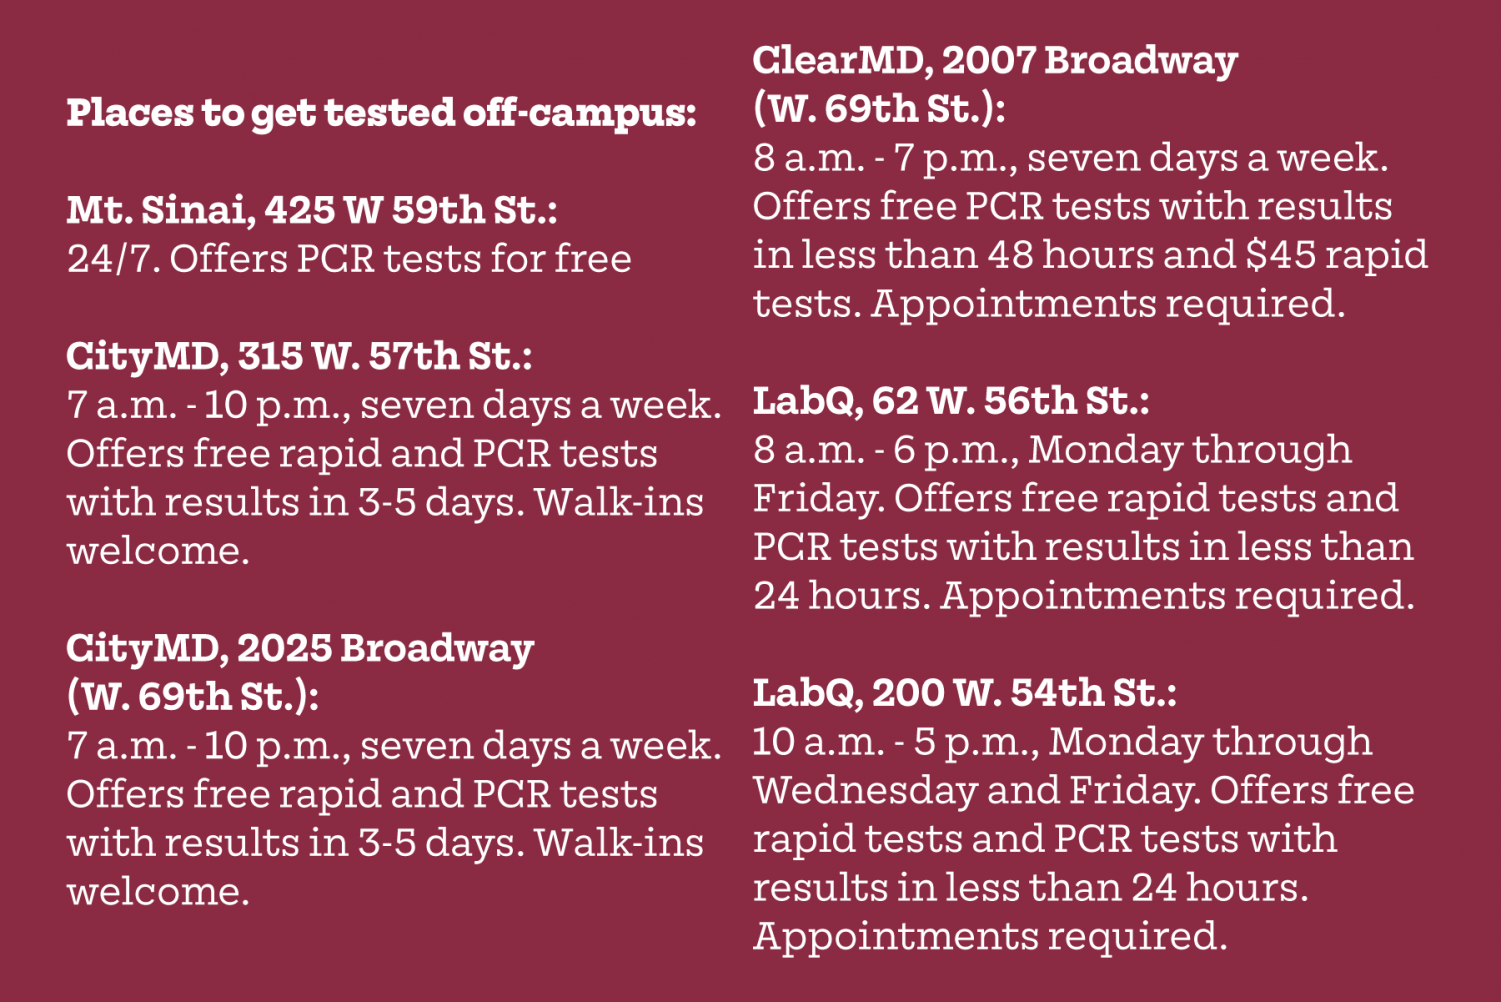 students who have had an exposure can get tested at many places near campus